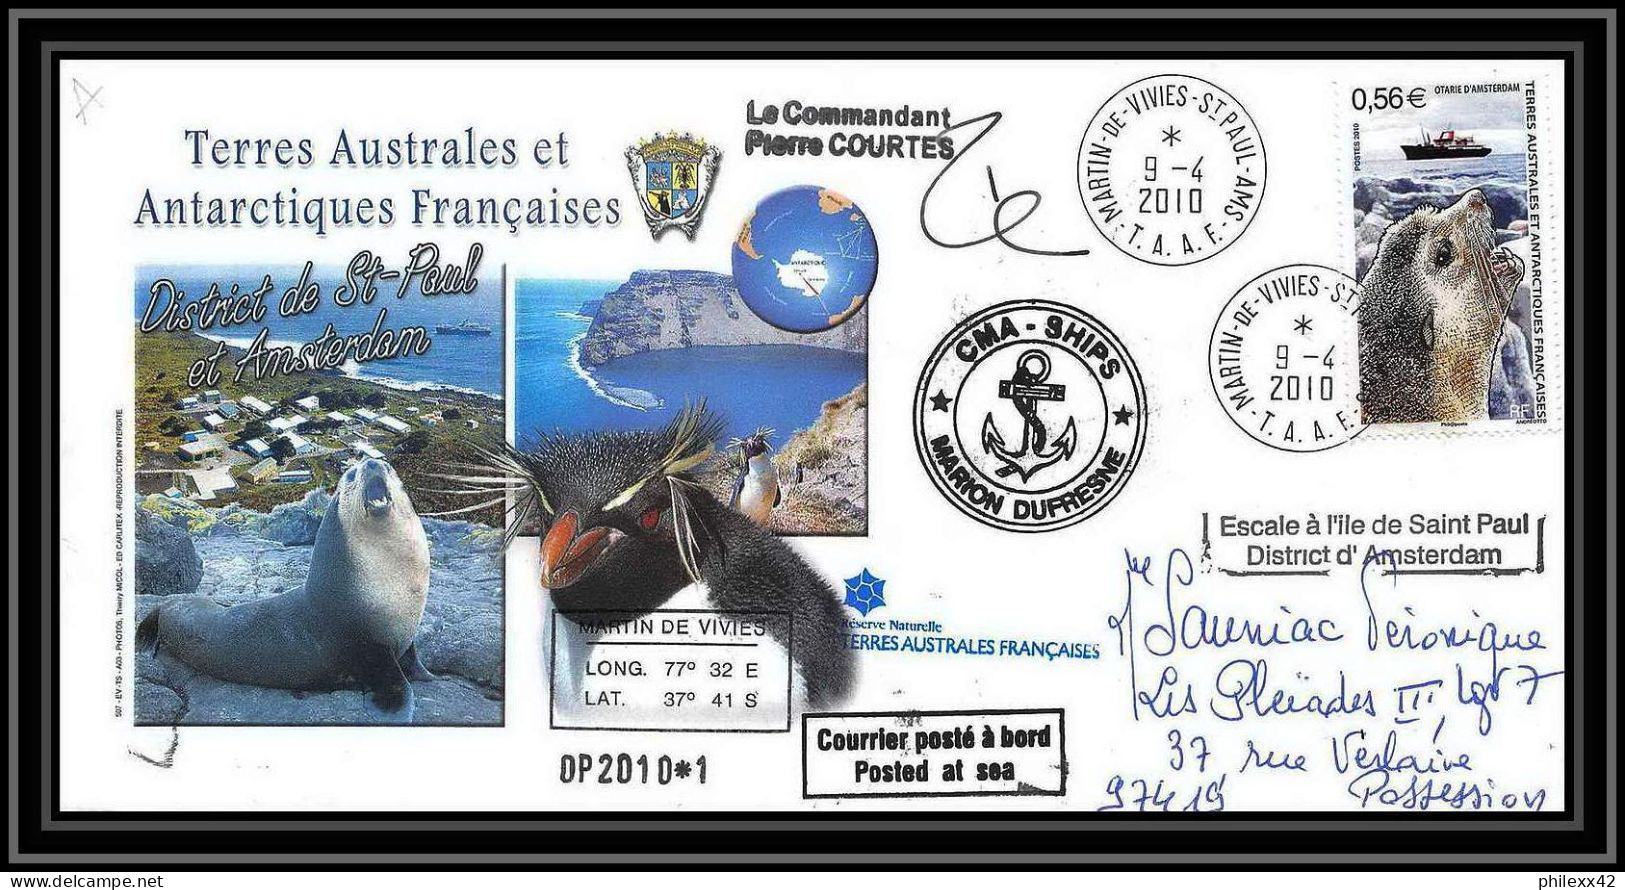 2999 Helilagon Terres Australes TAAF Lettre Cover Dufresne 2 Signé Signed St Paul Op 2010/1 9/4/2010 N°566 Sea Elephant - Helicópteros